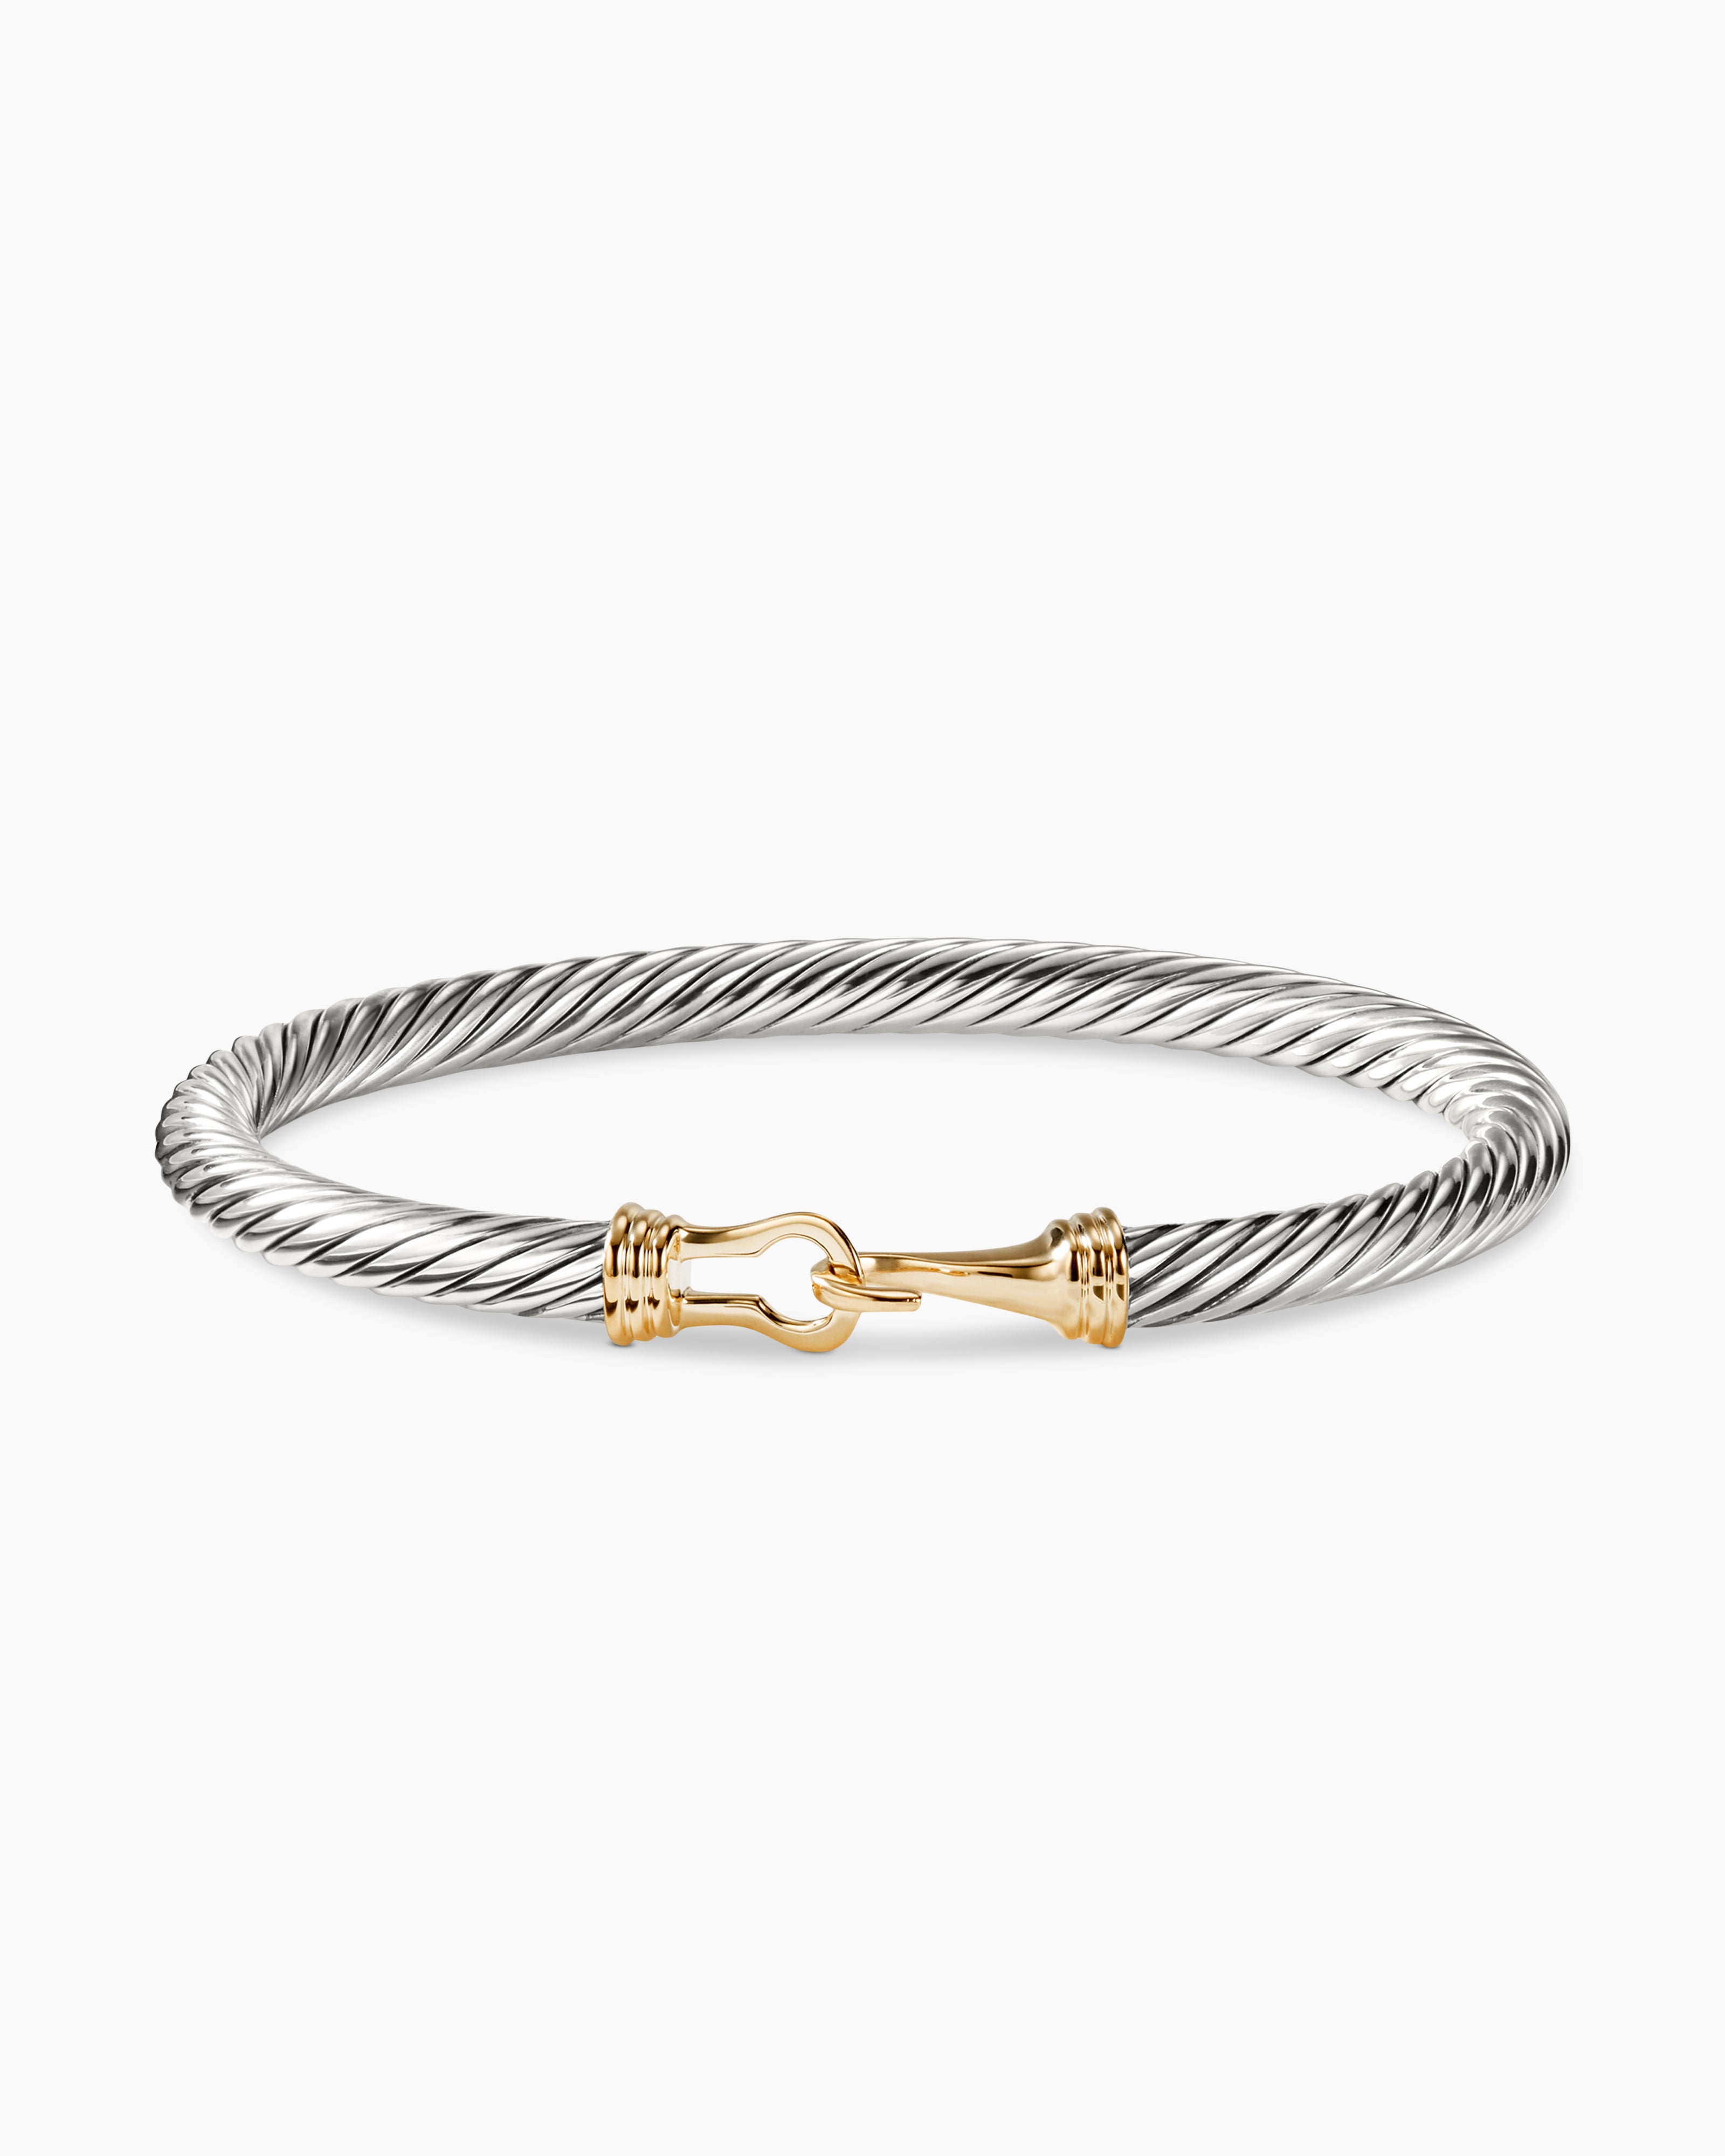 Buckle Classic Cable Bracelet in Sterling Silver with 14K Yellow